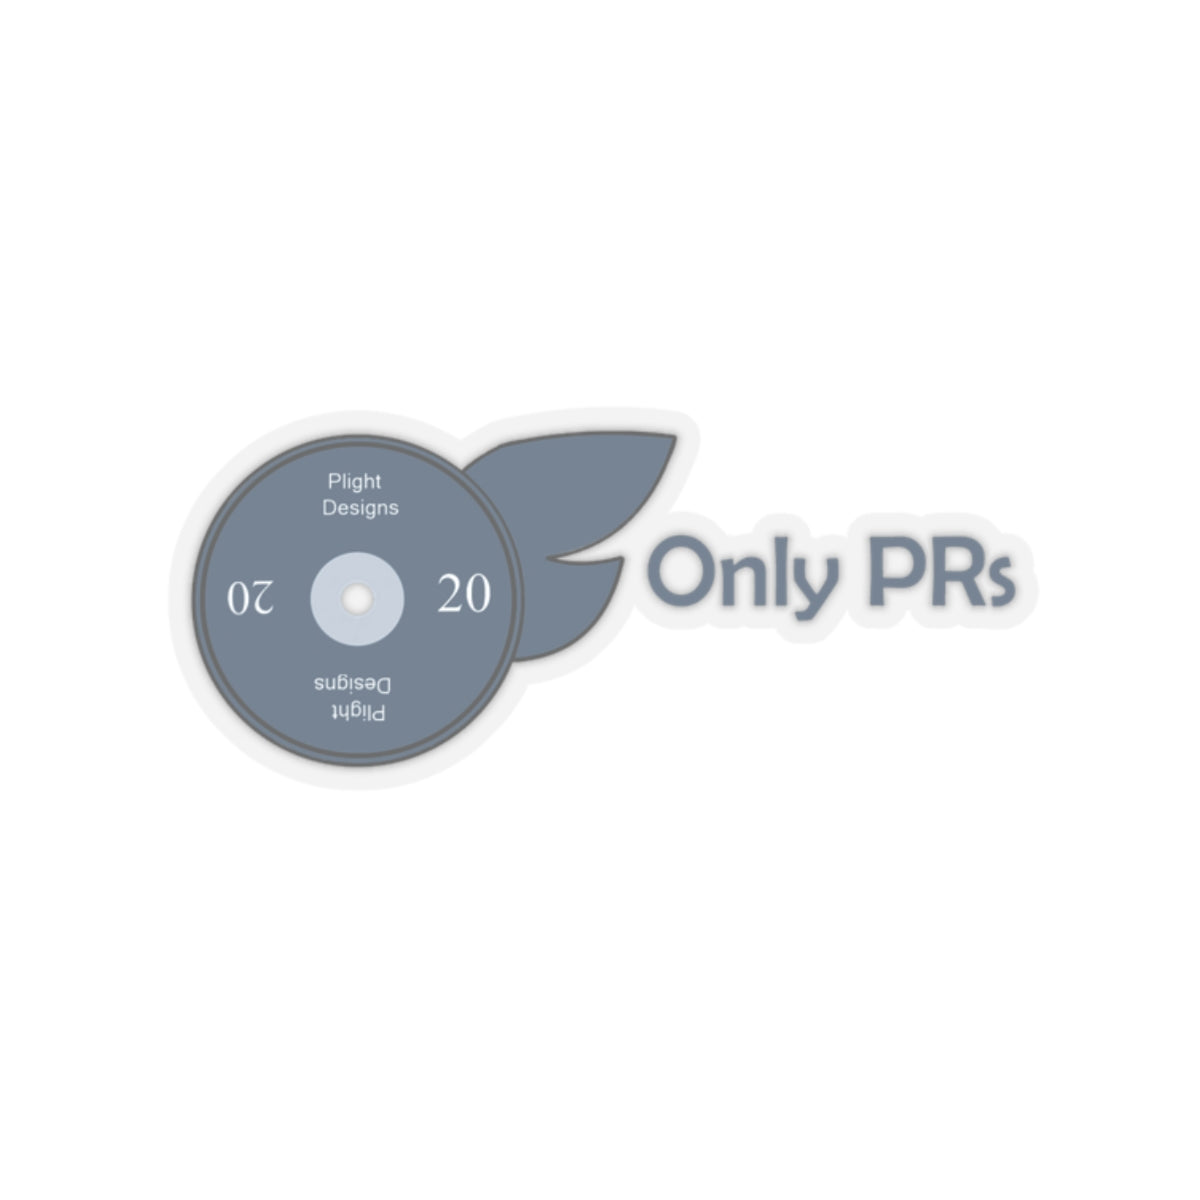 Only PRs Stickers